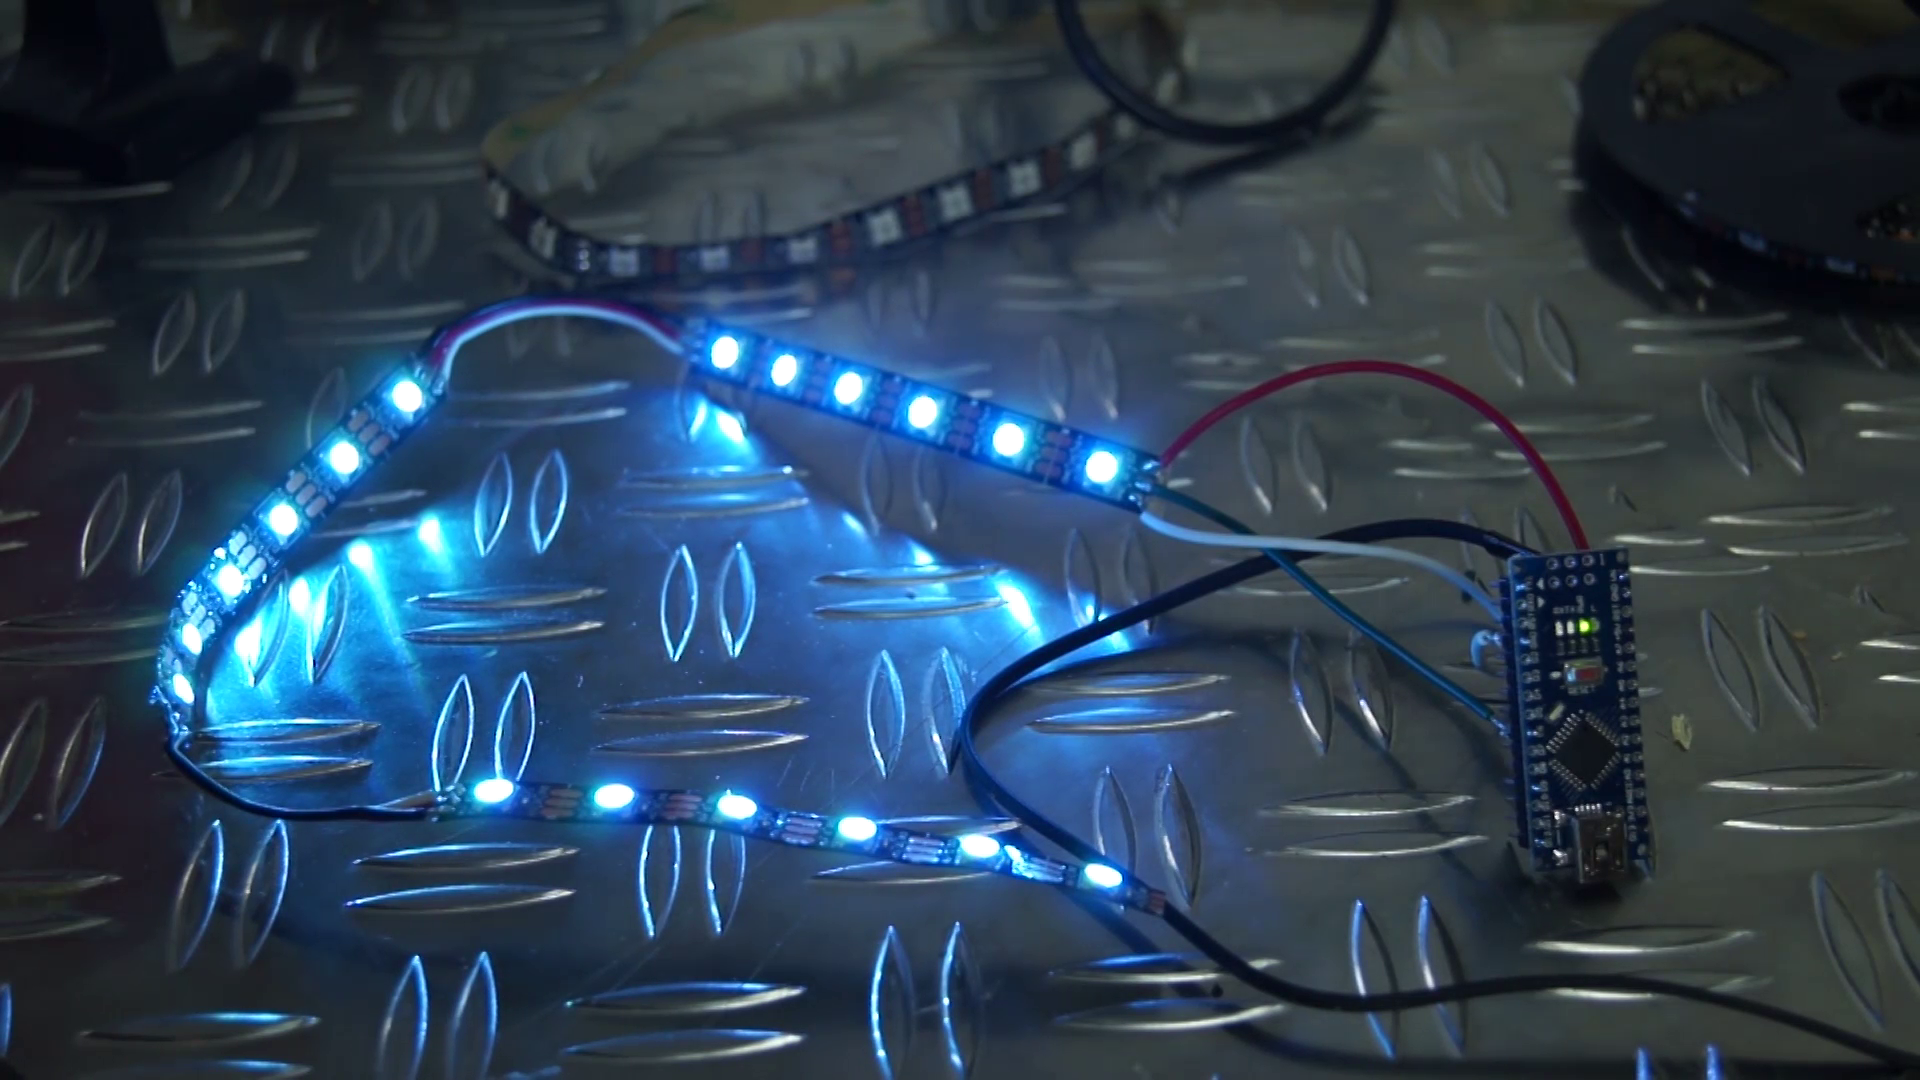 acrylic-led-lamp-pcb-inspired-colour-changing-rgb-2016-11-26-17h42m19s144.png